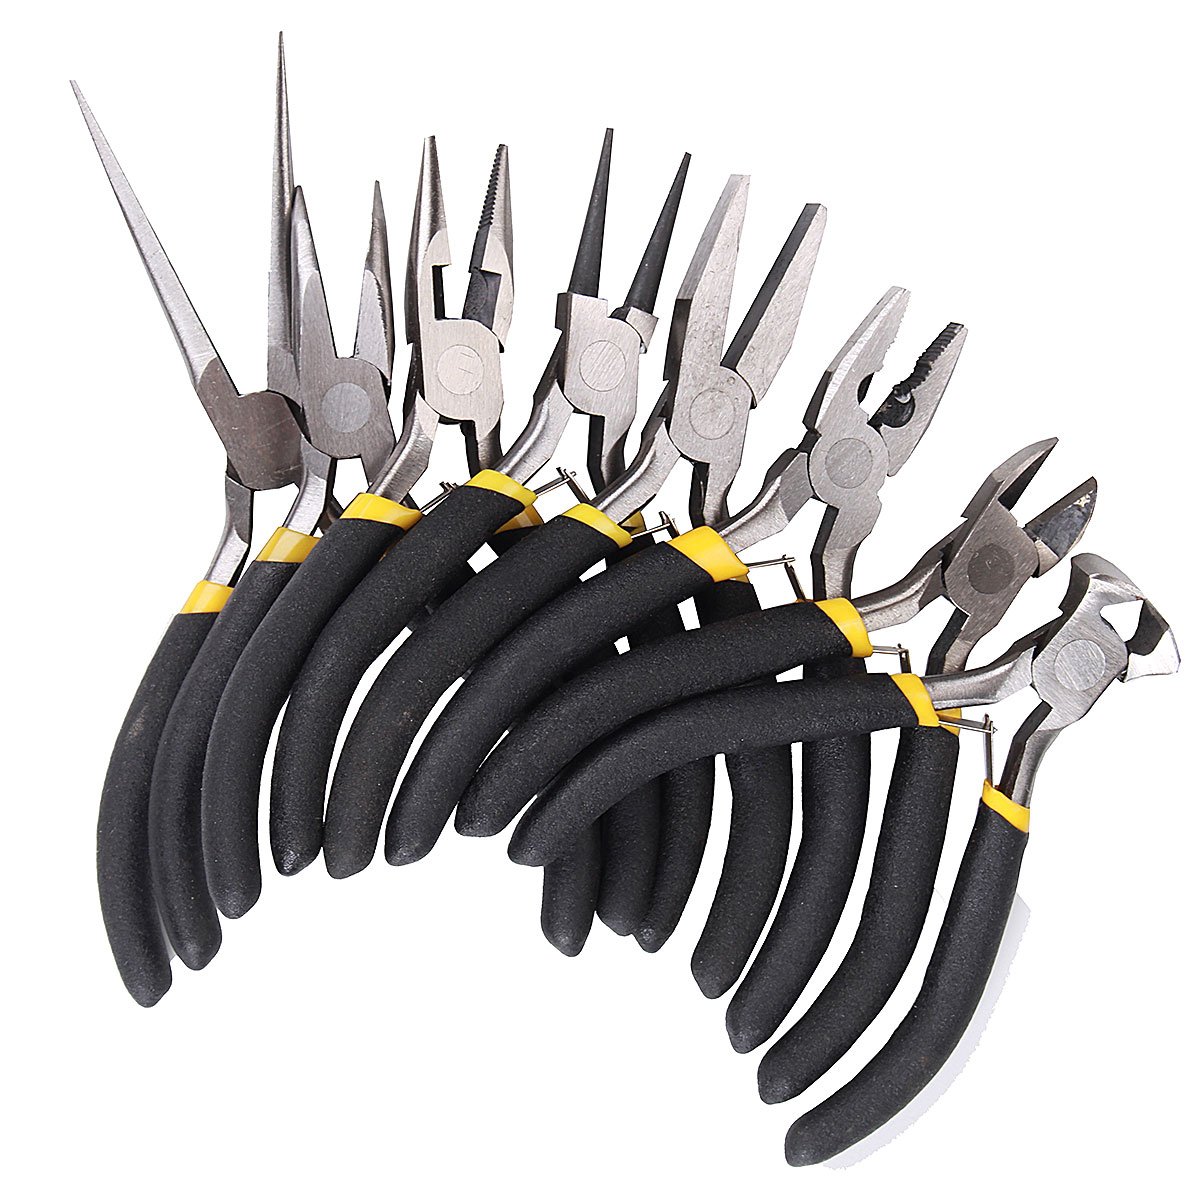 DANIU 8Pcs Round Beading Nose Pliers Wire Side Cutters Pliers Tools Set 2